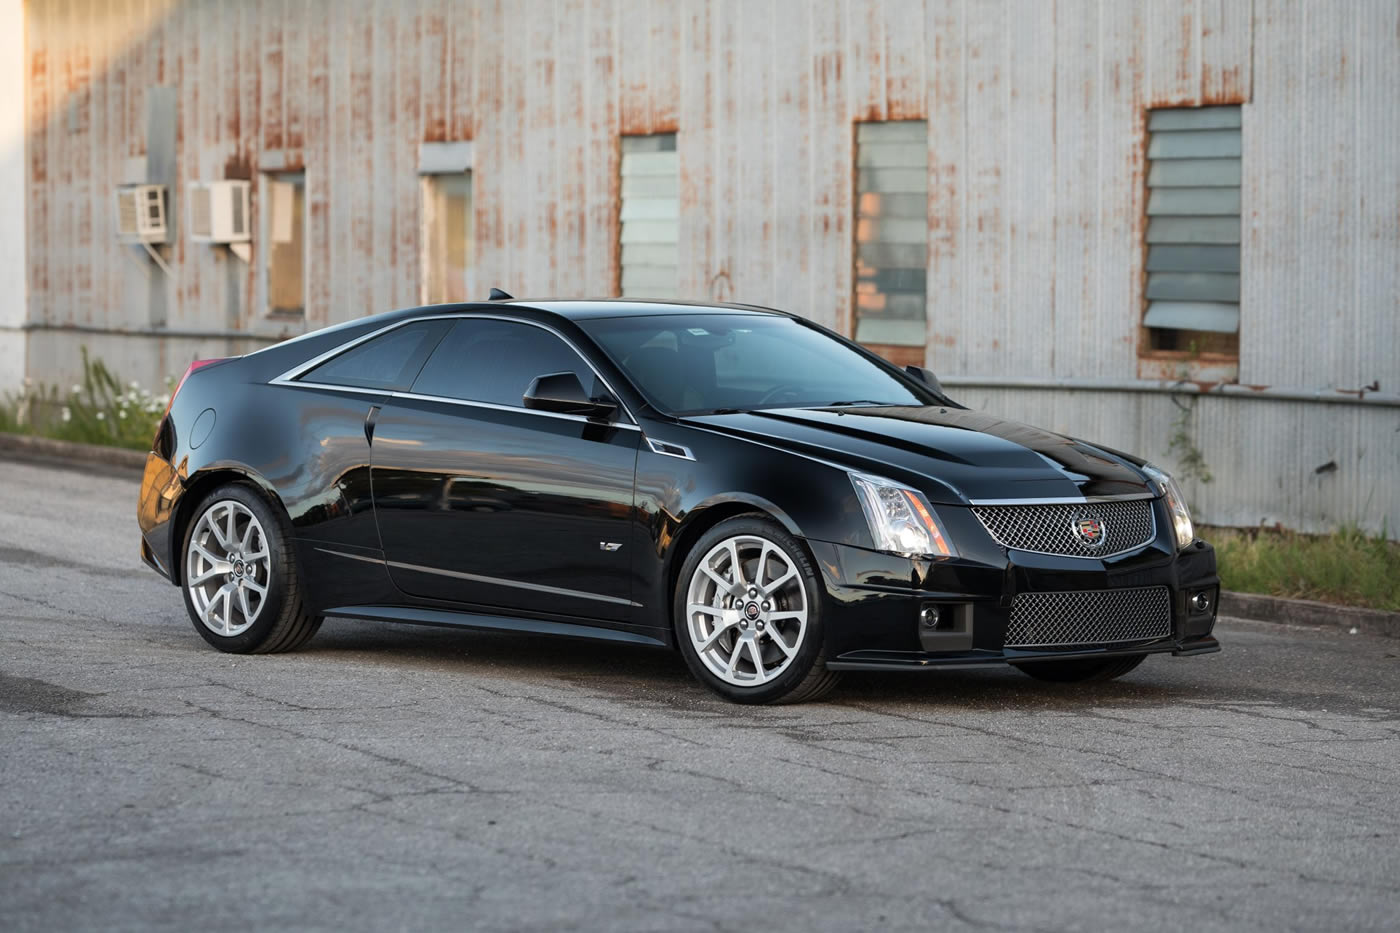 2013 Cadillac Cts V Coupe In Black Diamond Tricoat Cadillac V Series